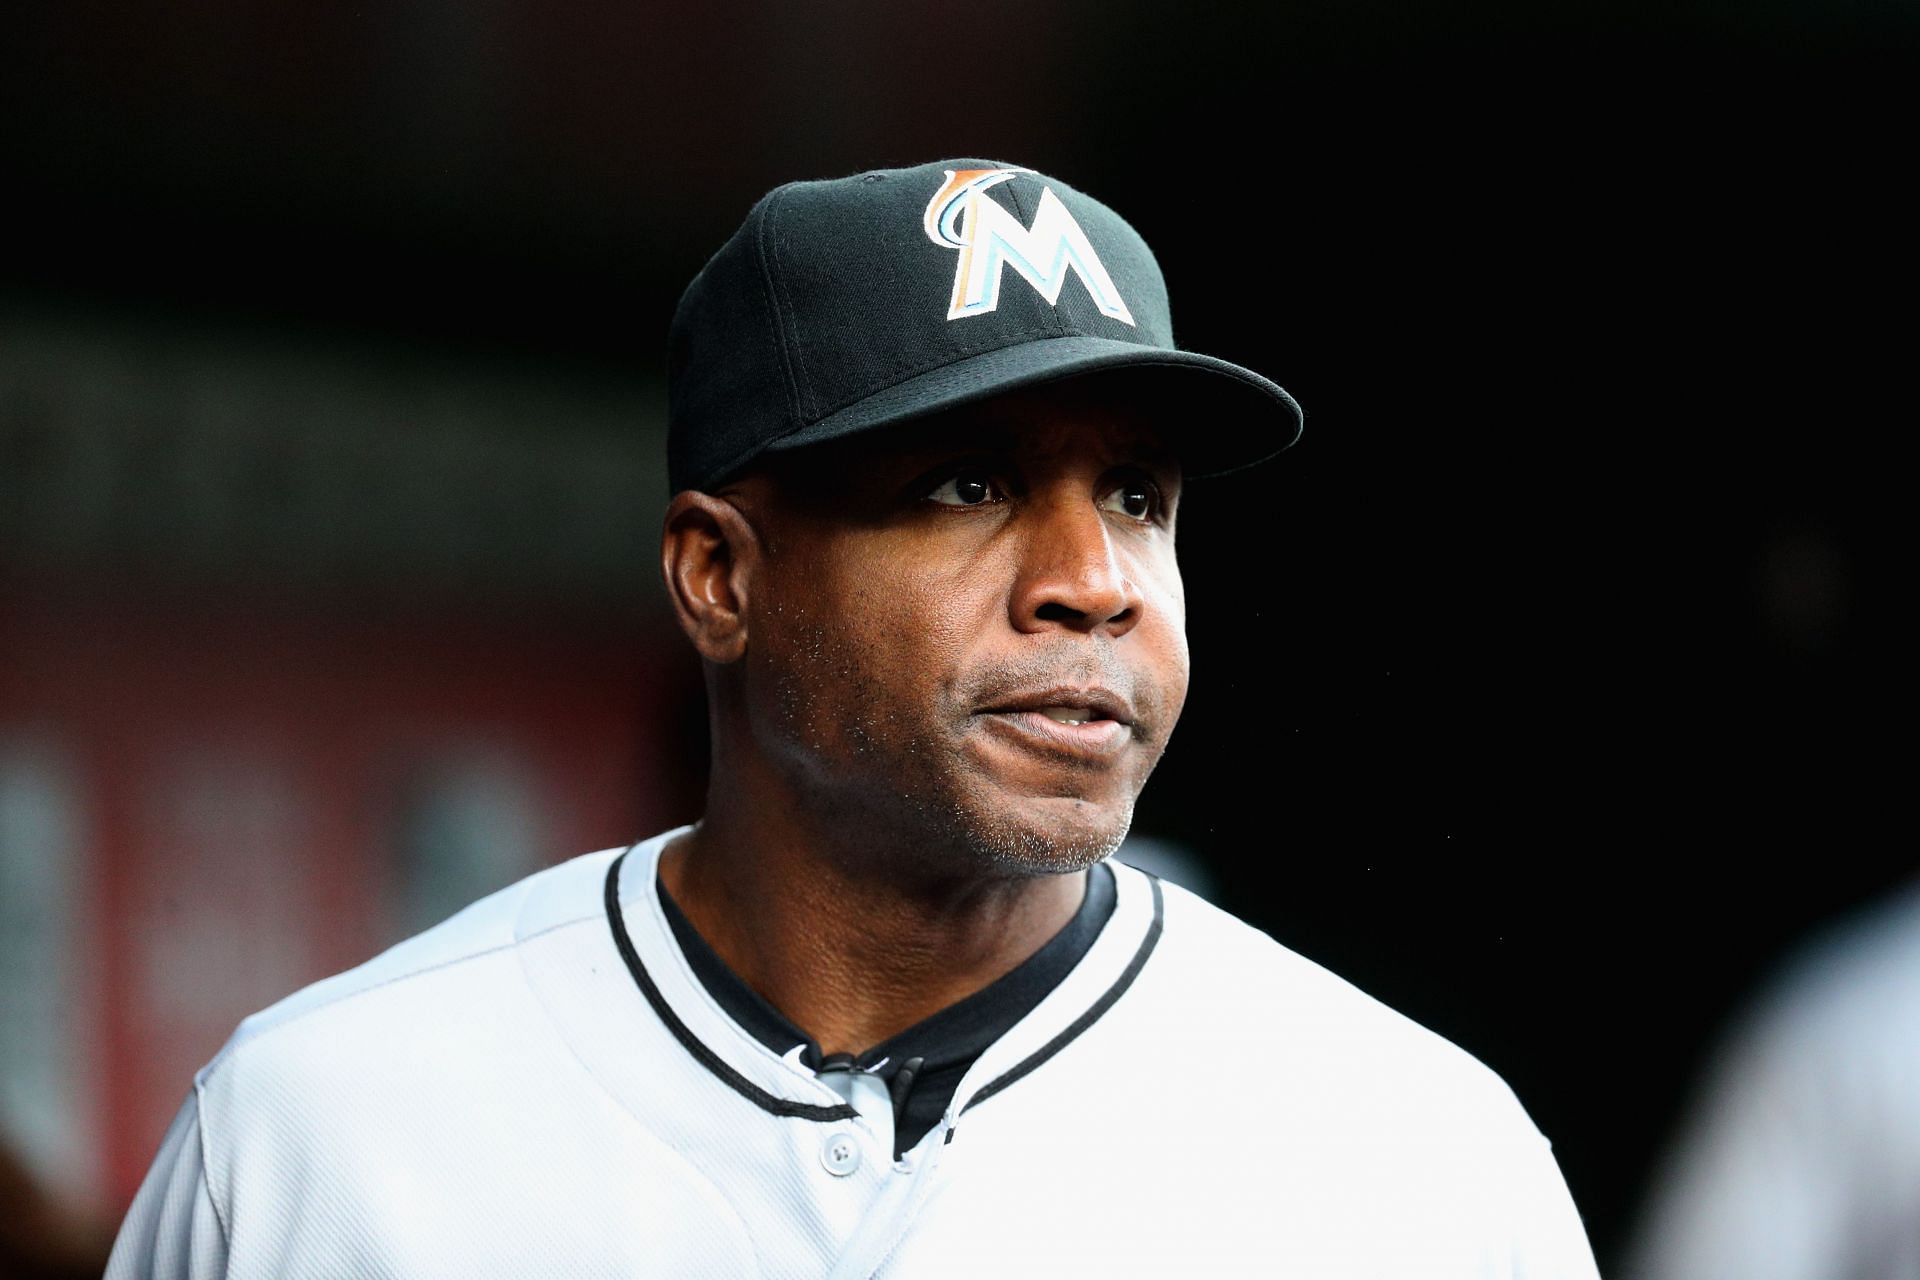 MLB News: New Barry Bonds documentary in the works: Will Bonds